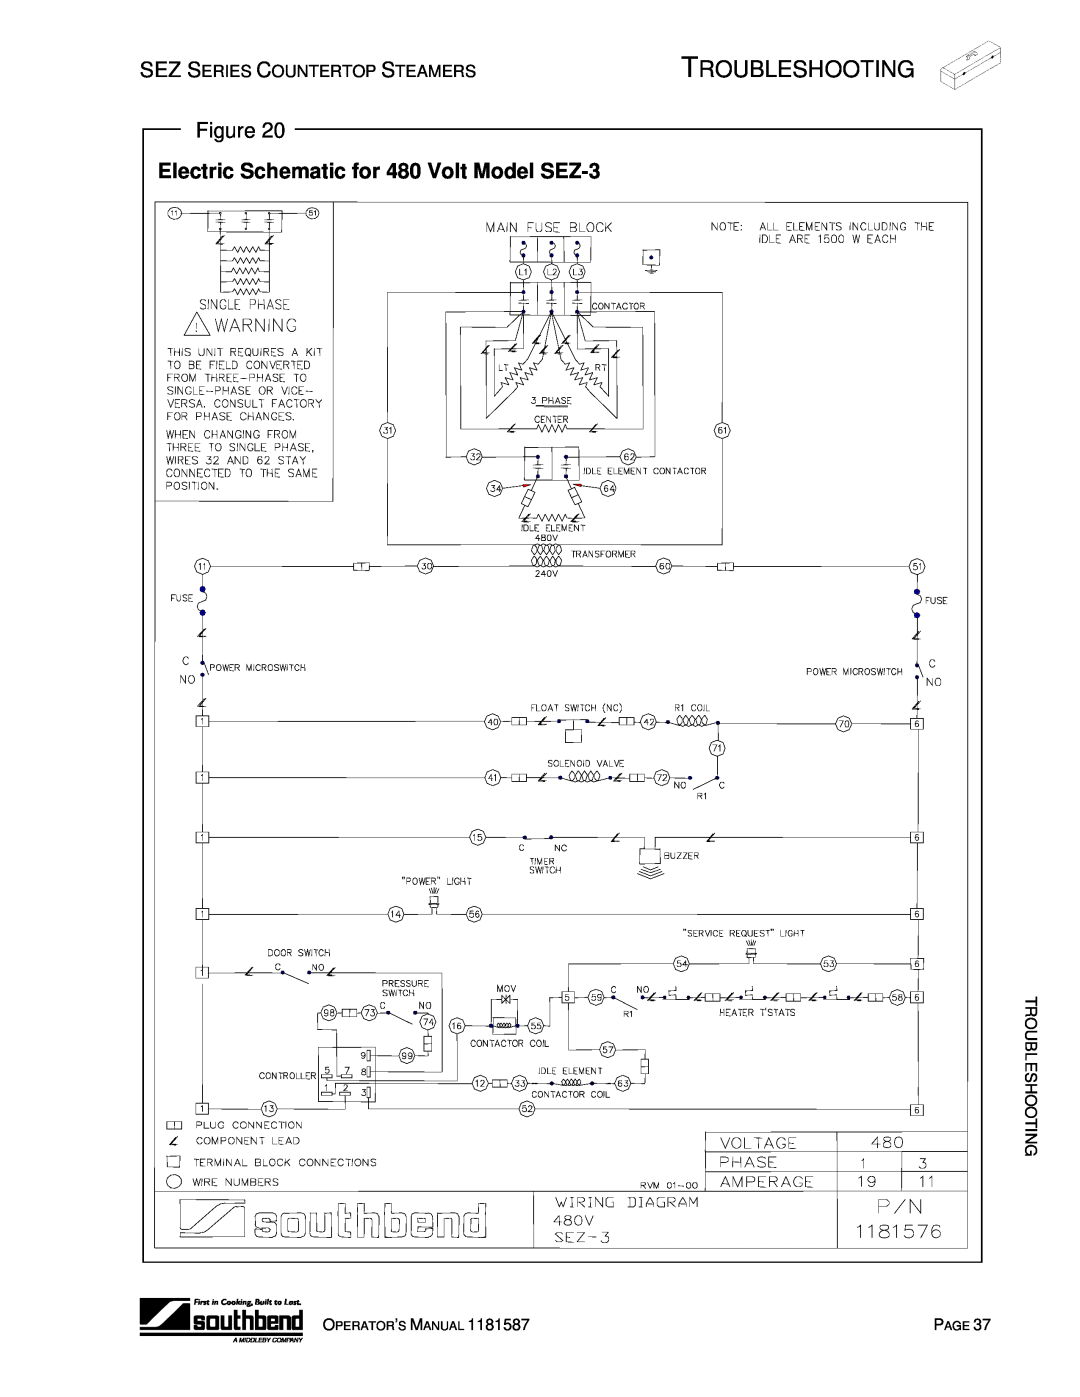 Southbend SEZ-5 manual Electric Schematic for 480 Volt Model SEZ-3, Troubleshooting 